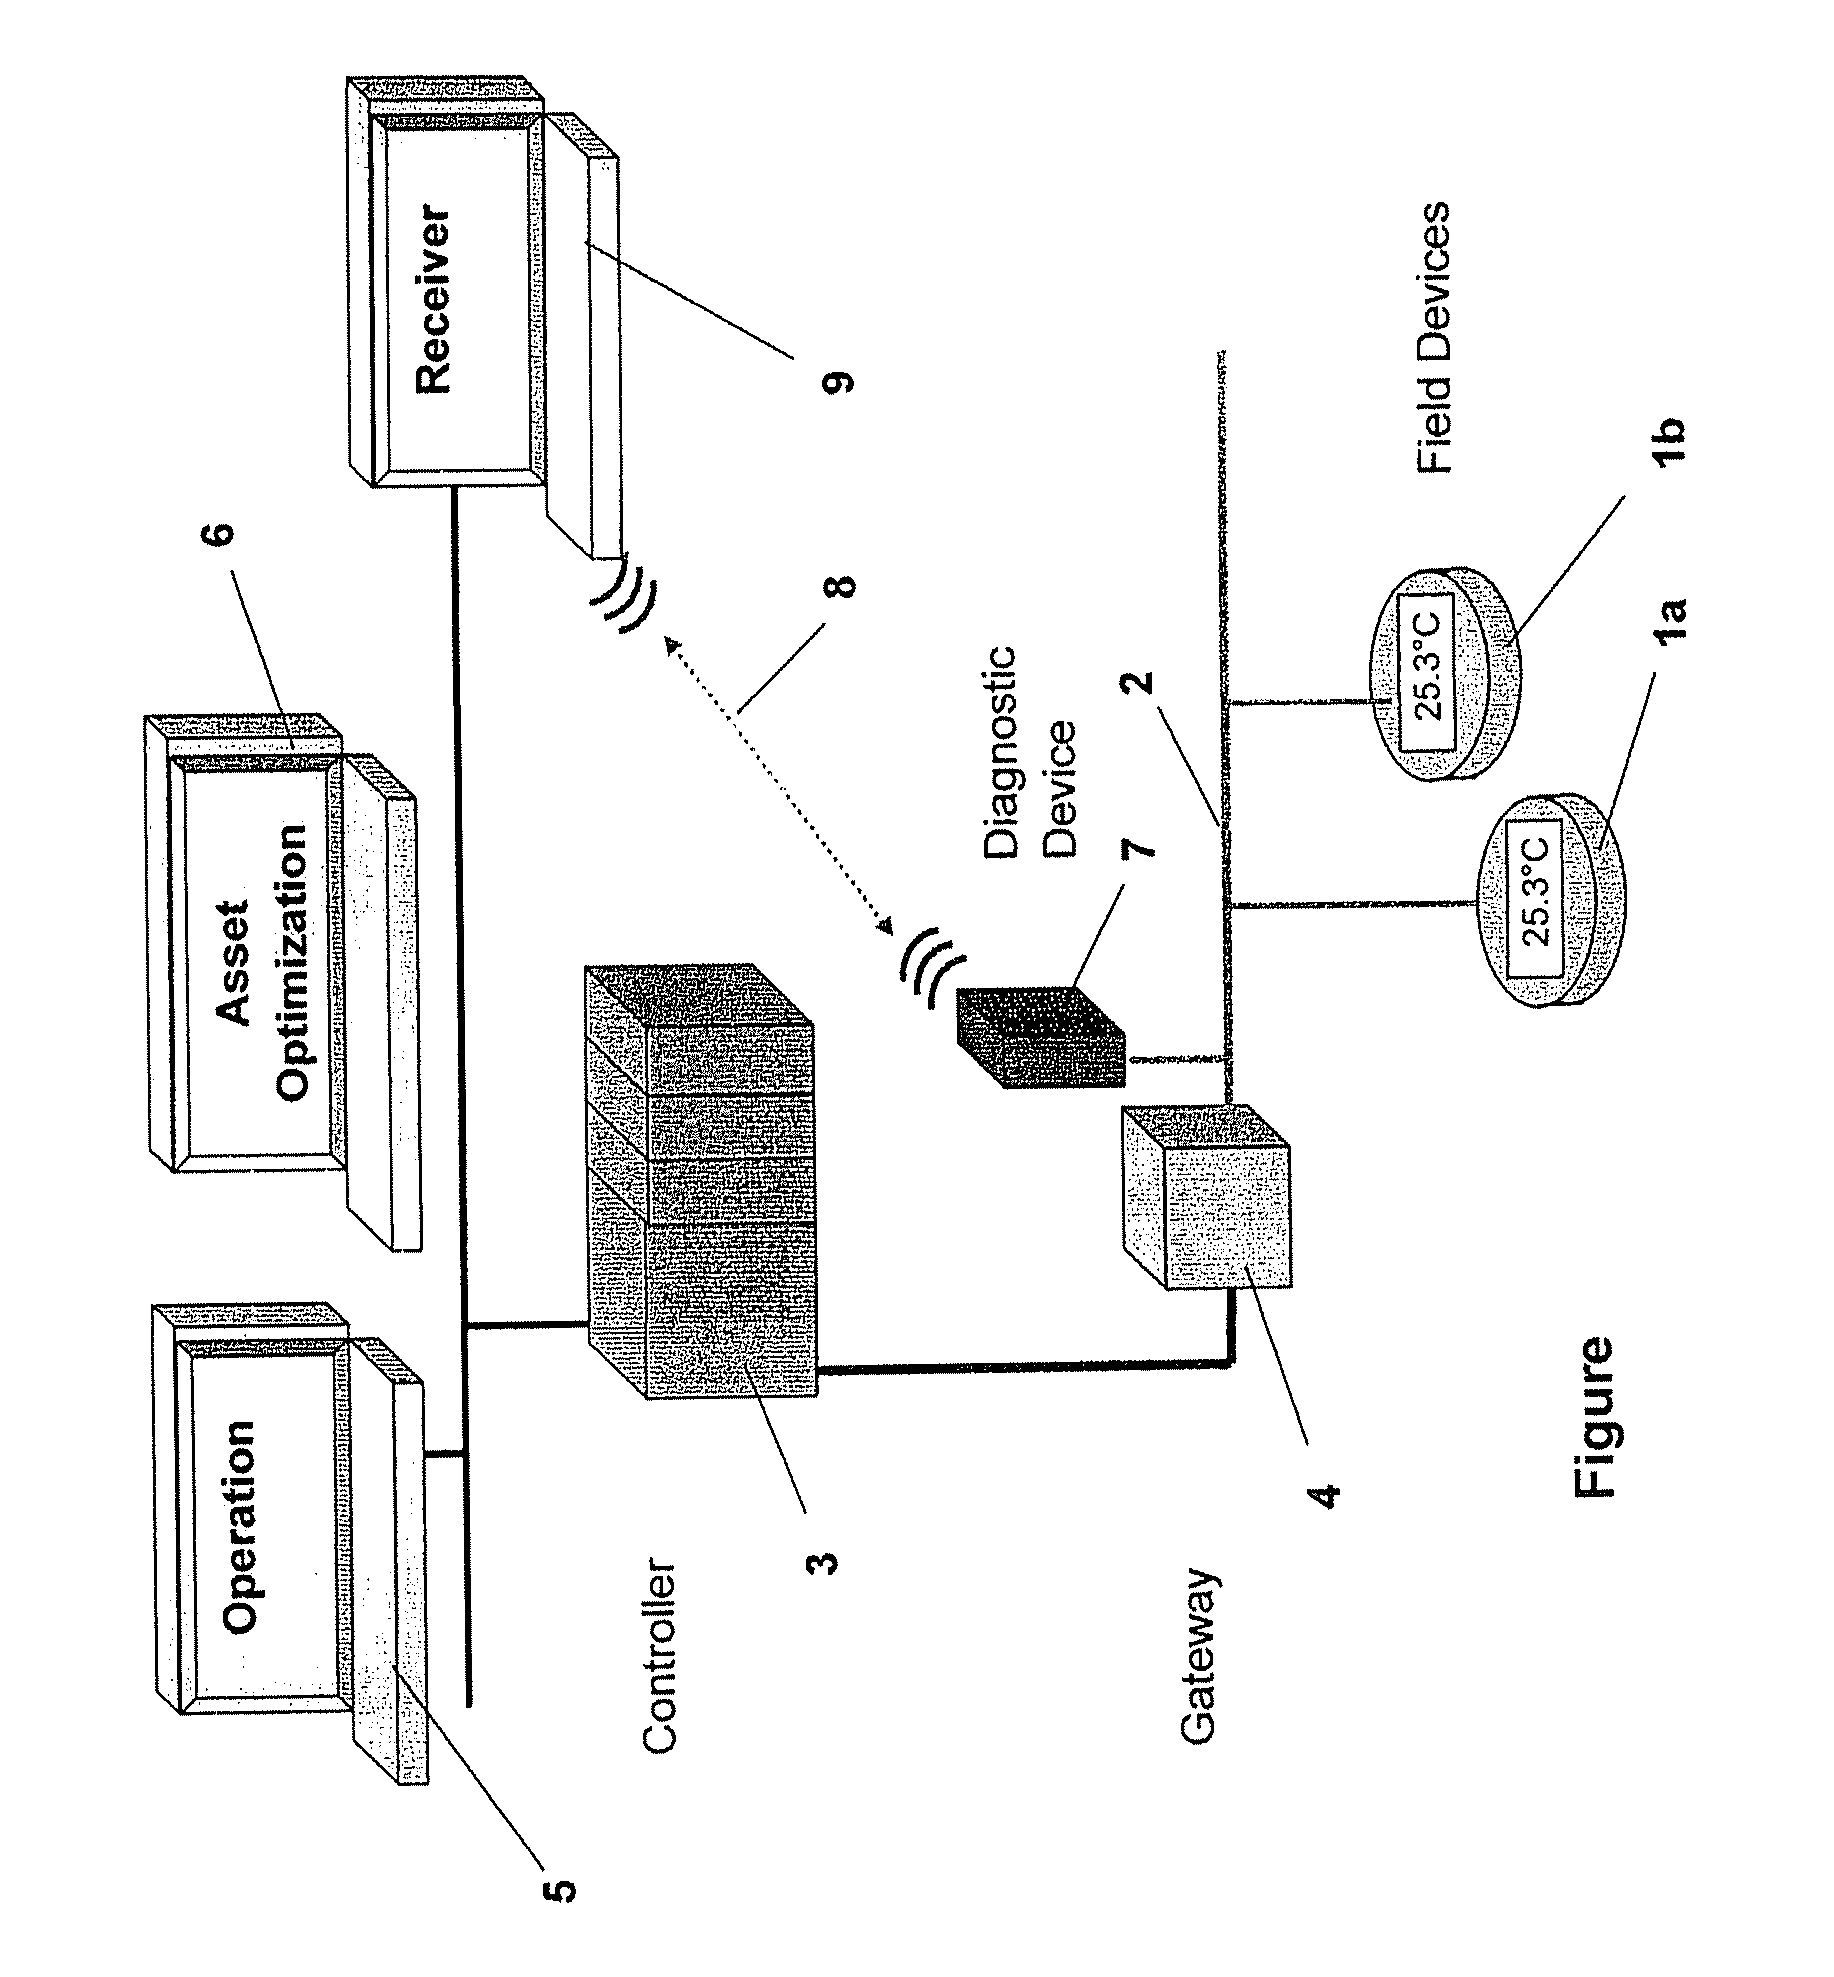 System and method for monitoring the data traffic on a fieldbus